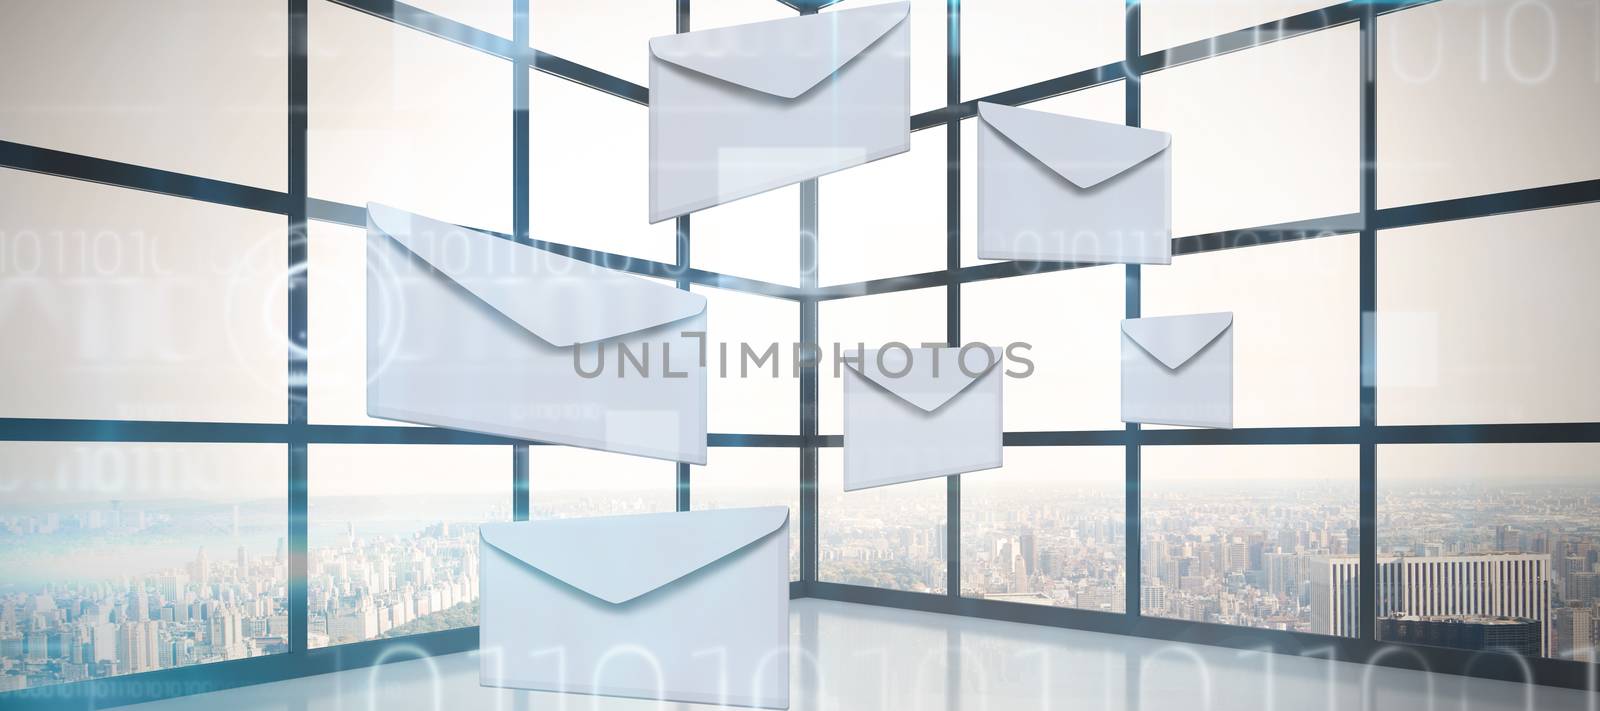 Composite image of graphic of envelopes on white background by Wavebreakmedia